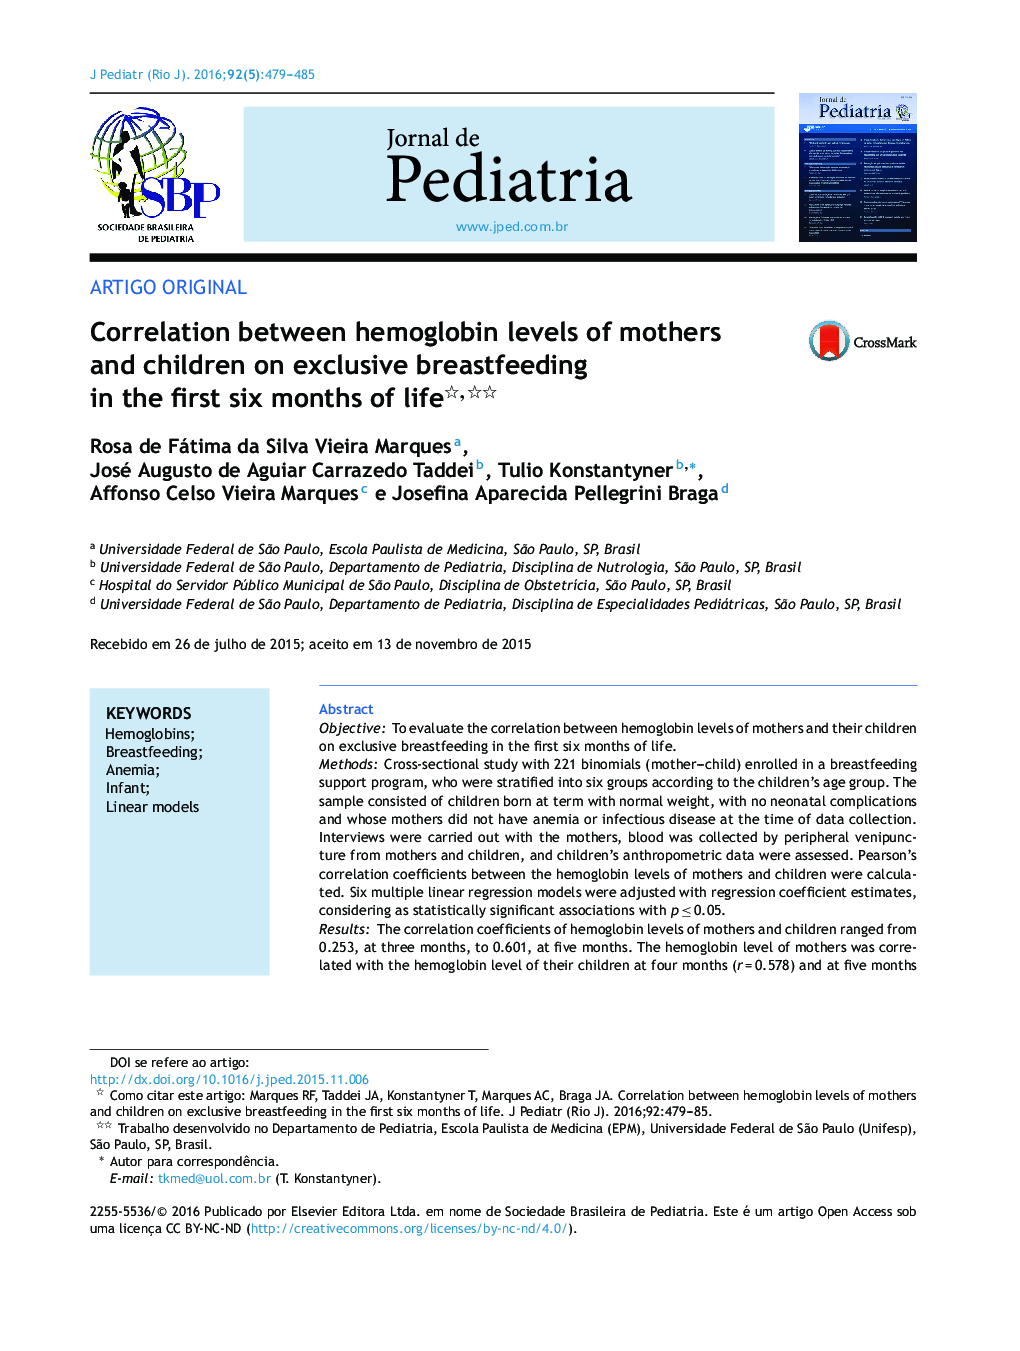 Correlation between hemoglobin levels of mothers and children on exclusive breastfeeding in the first six months of life 